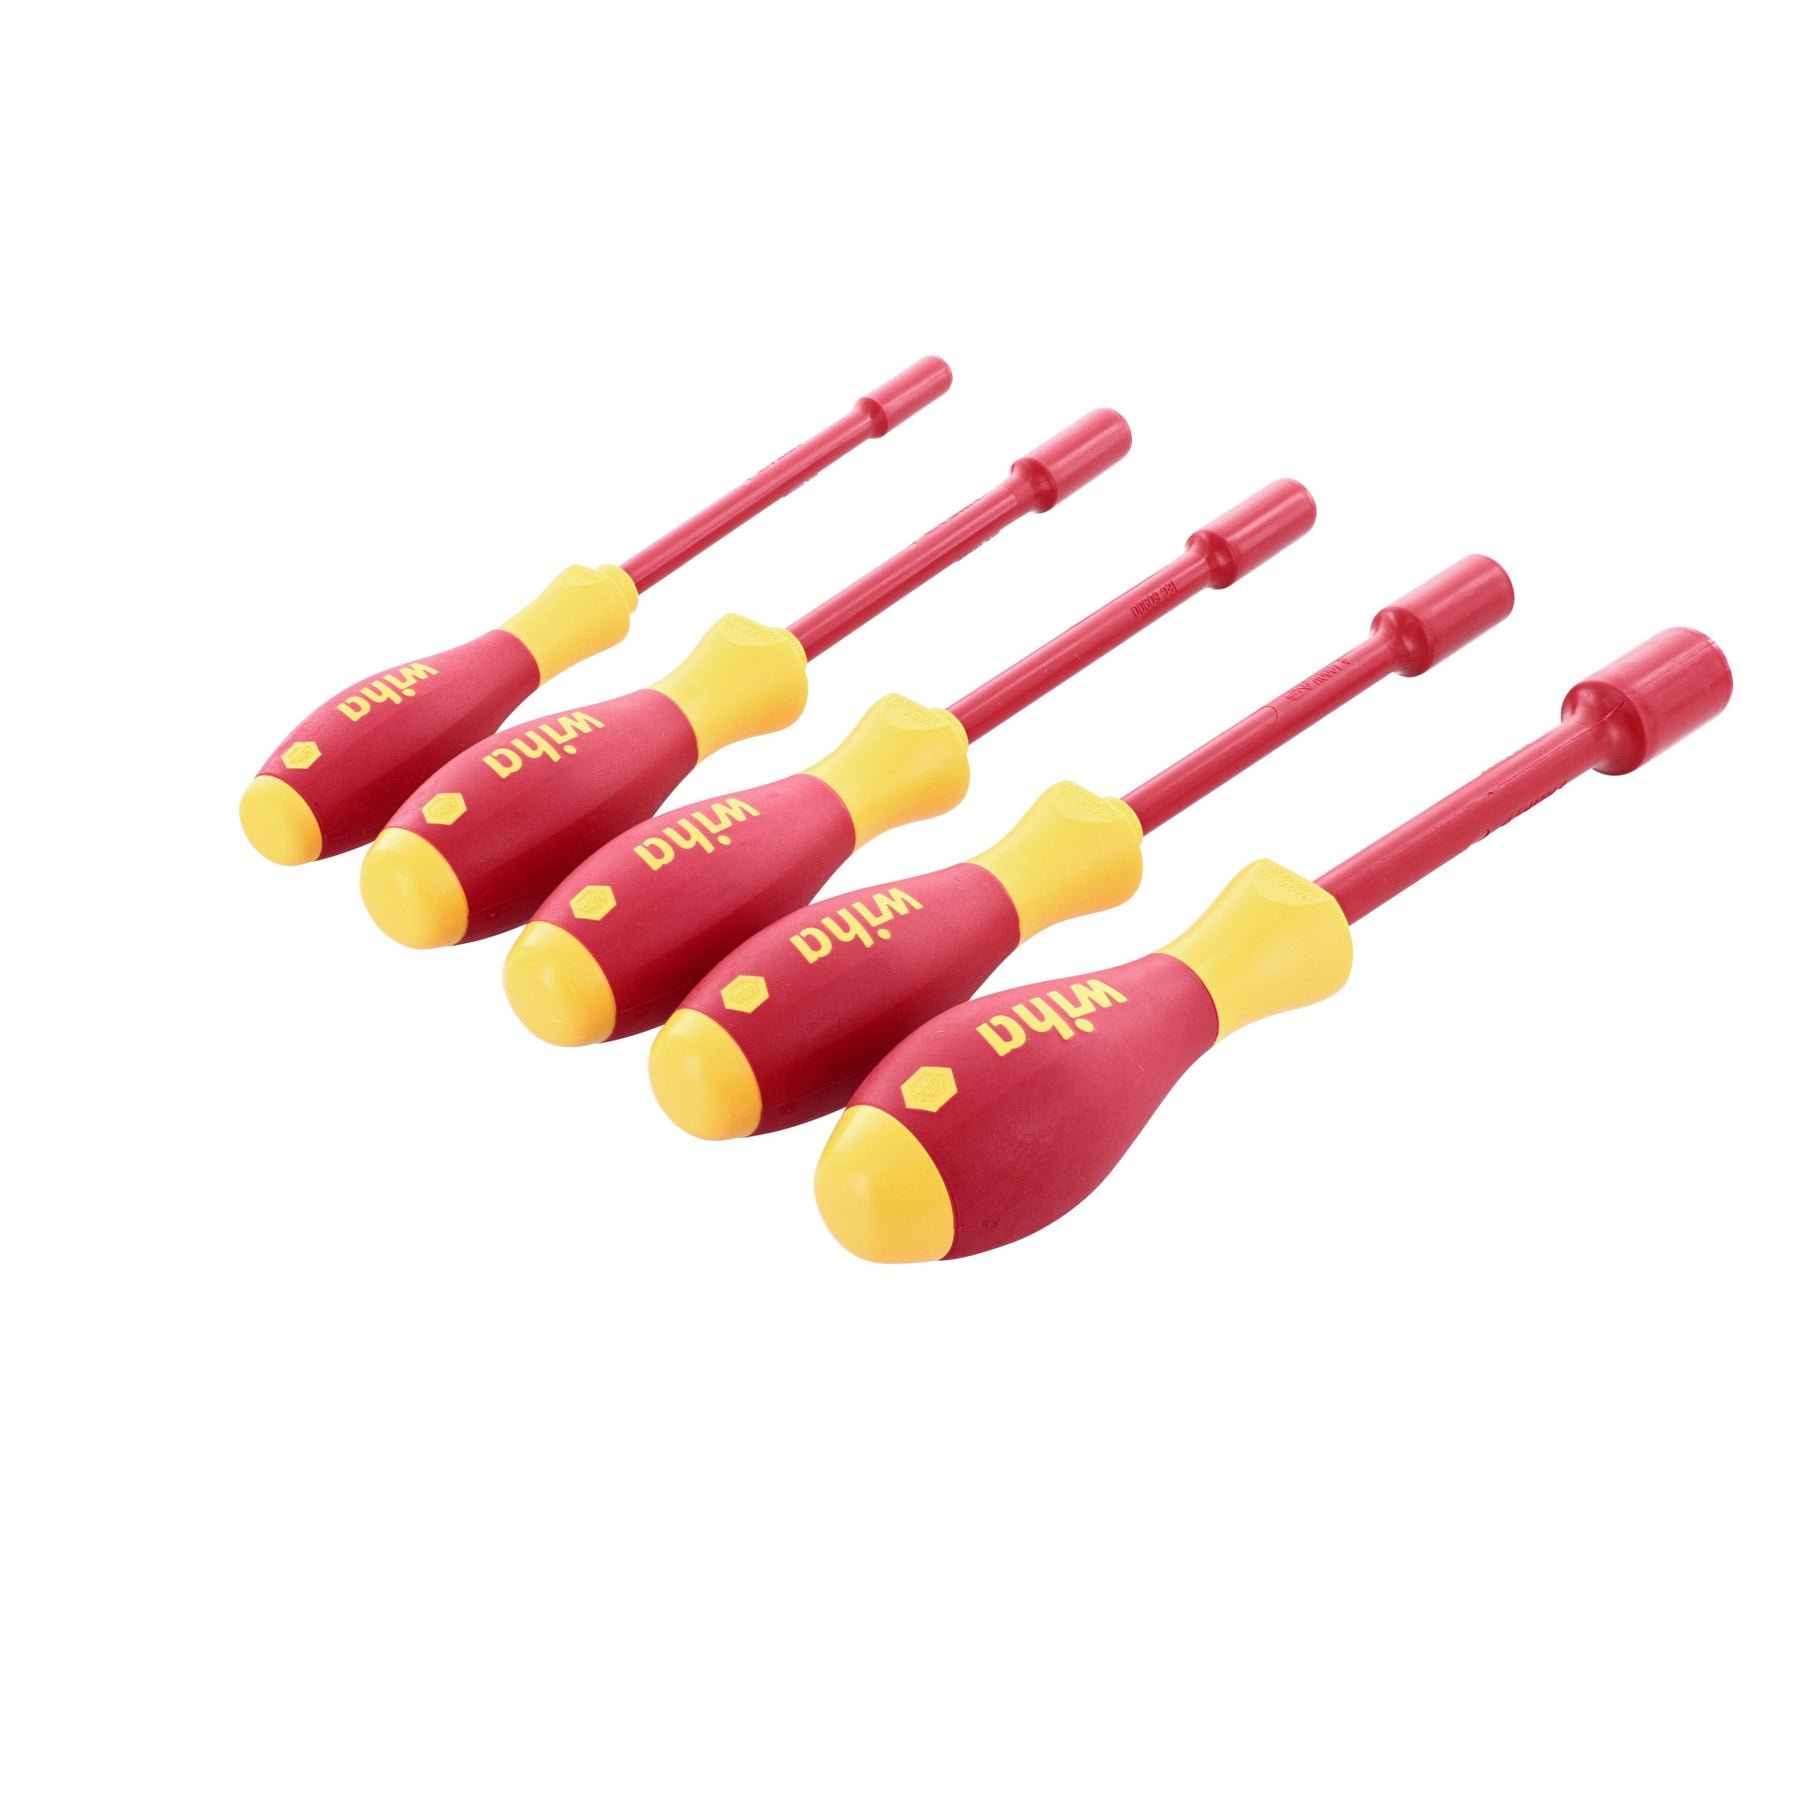 5 Piece Insulated SoftFinish Nut Driver Set - Inch